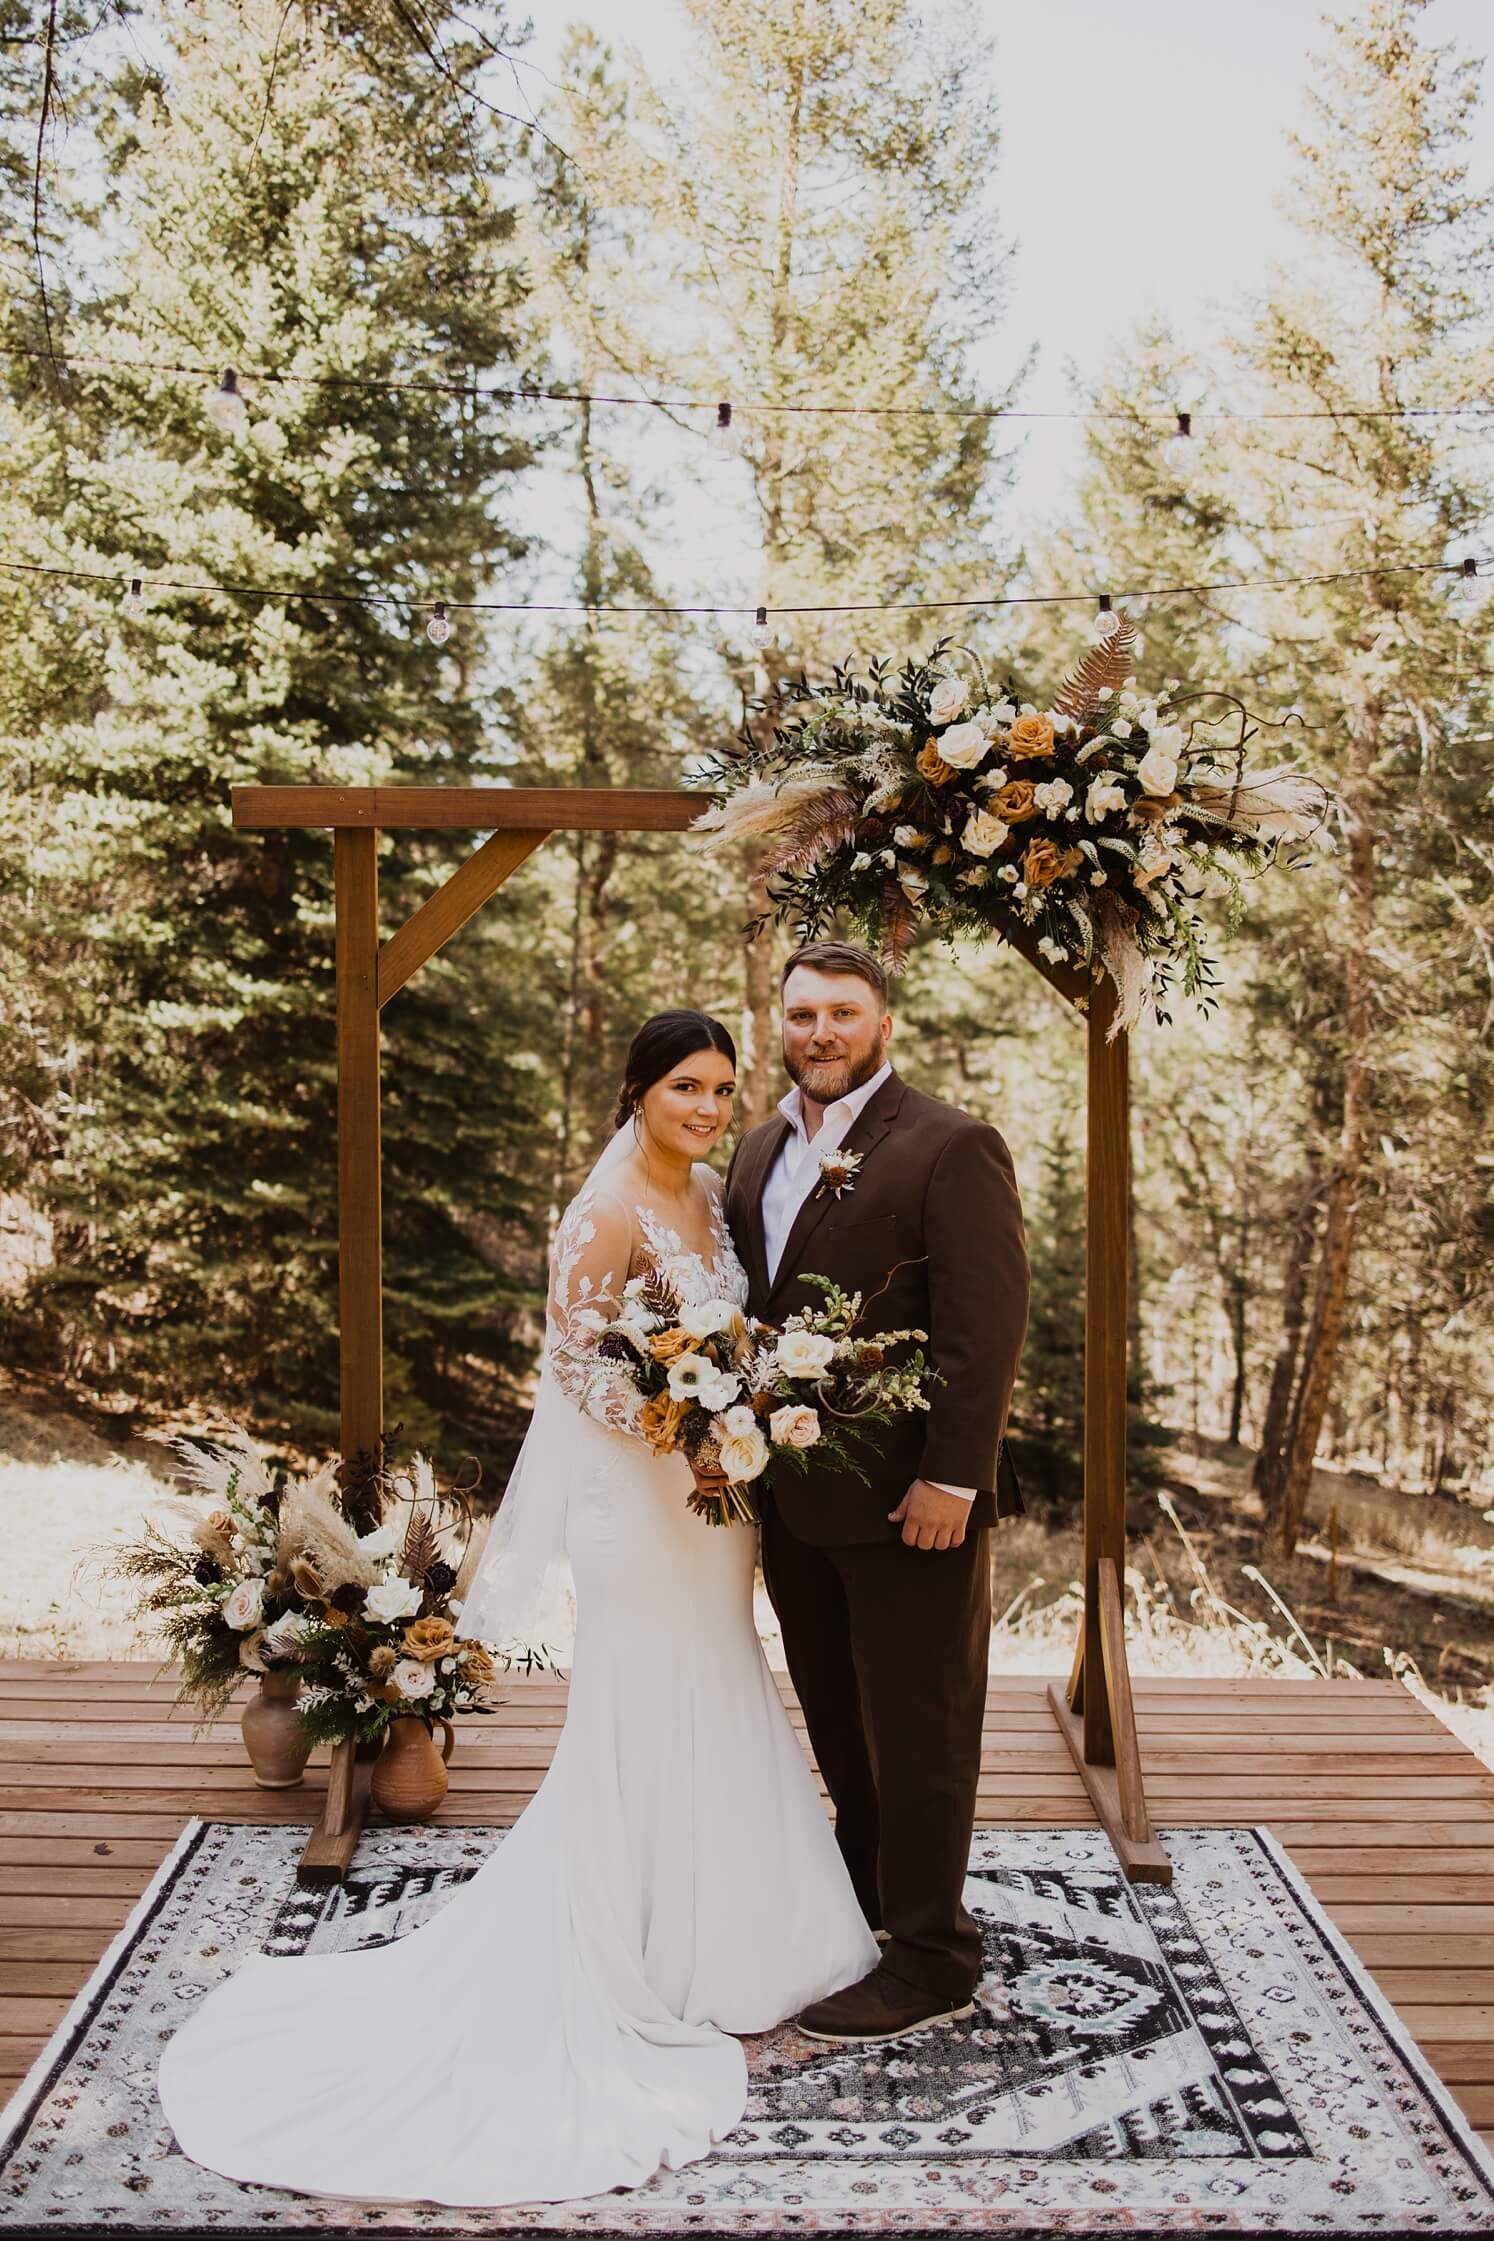 Bride and groom standing at altar at Evergreen wedding venue | McArthur Weddings and Events